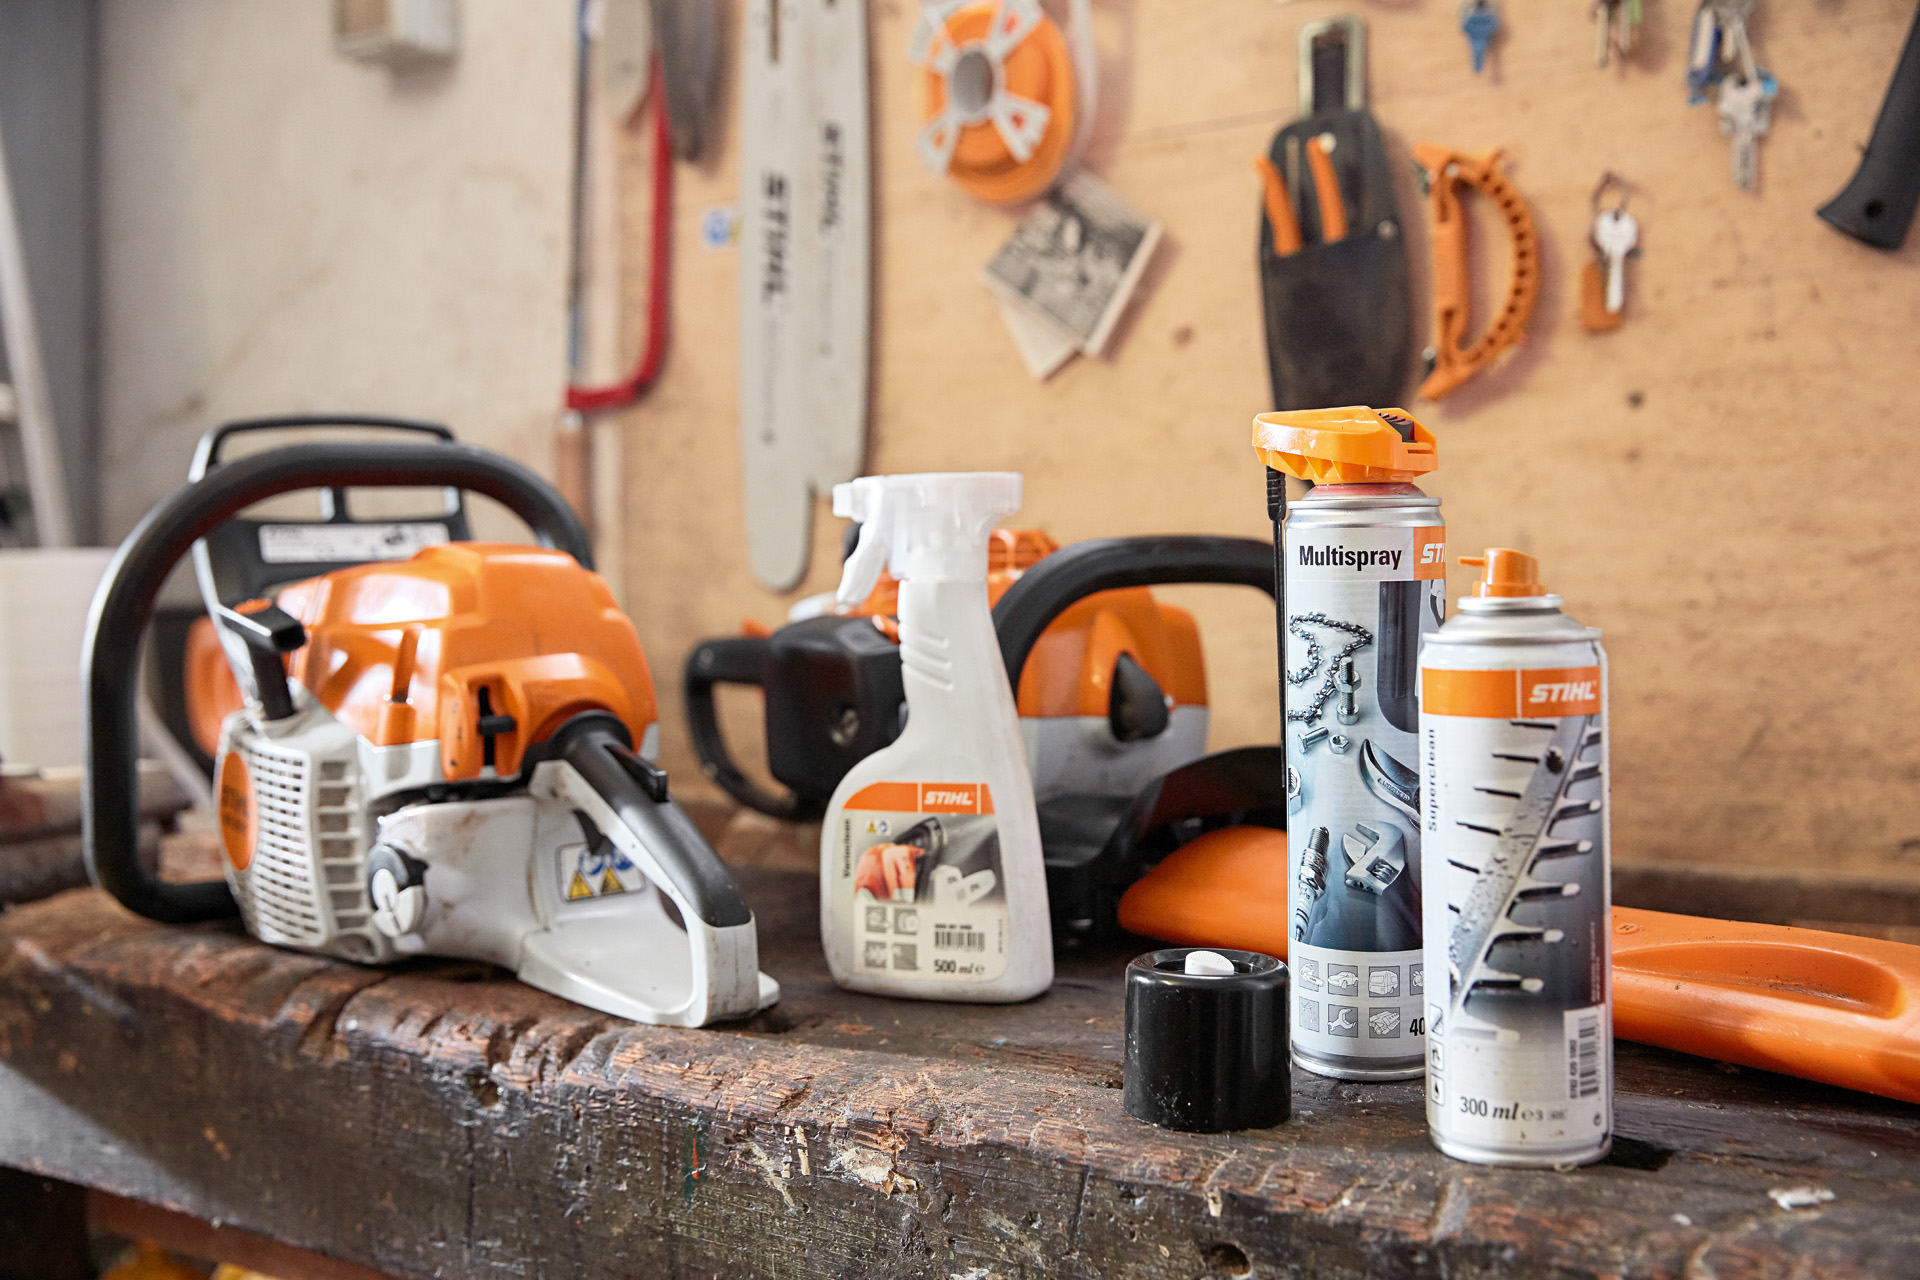 A workbench with several STIHL products on it: a chainsaw, Varioclean, Multispray and Superclean resin solvent